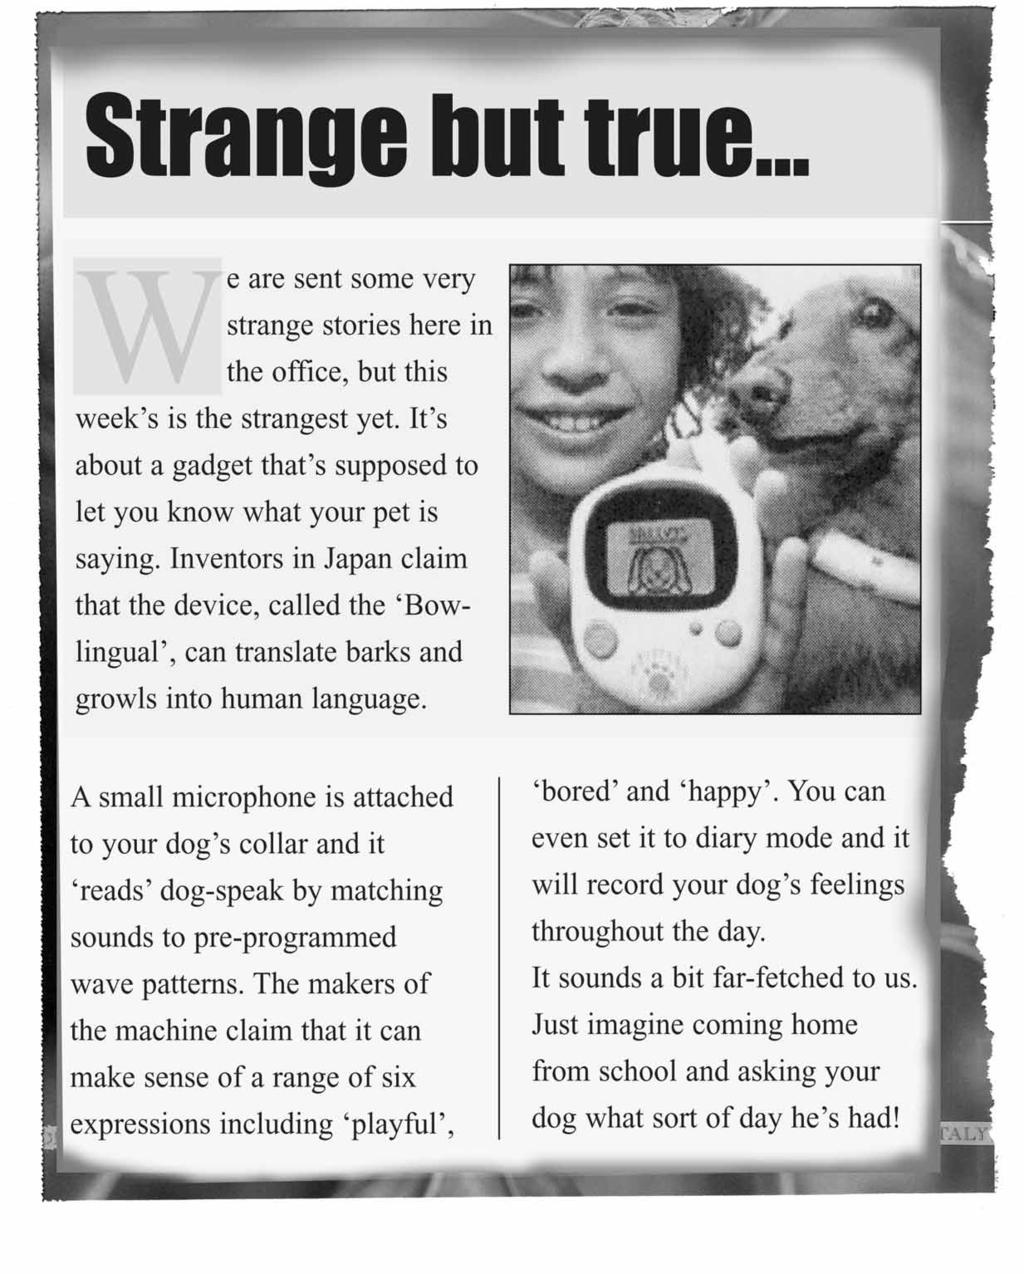 Strange but true... We are sent some very strange stories here in the office, but this week s is the strangest yet. It s about a gadget that s supposed to let you know what your pet is saying.